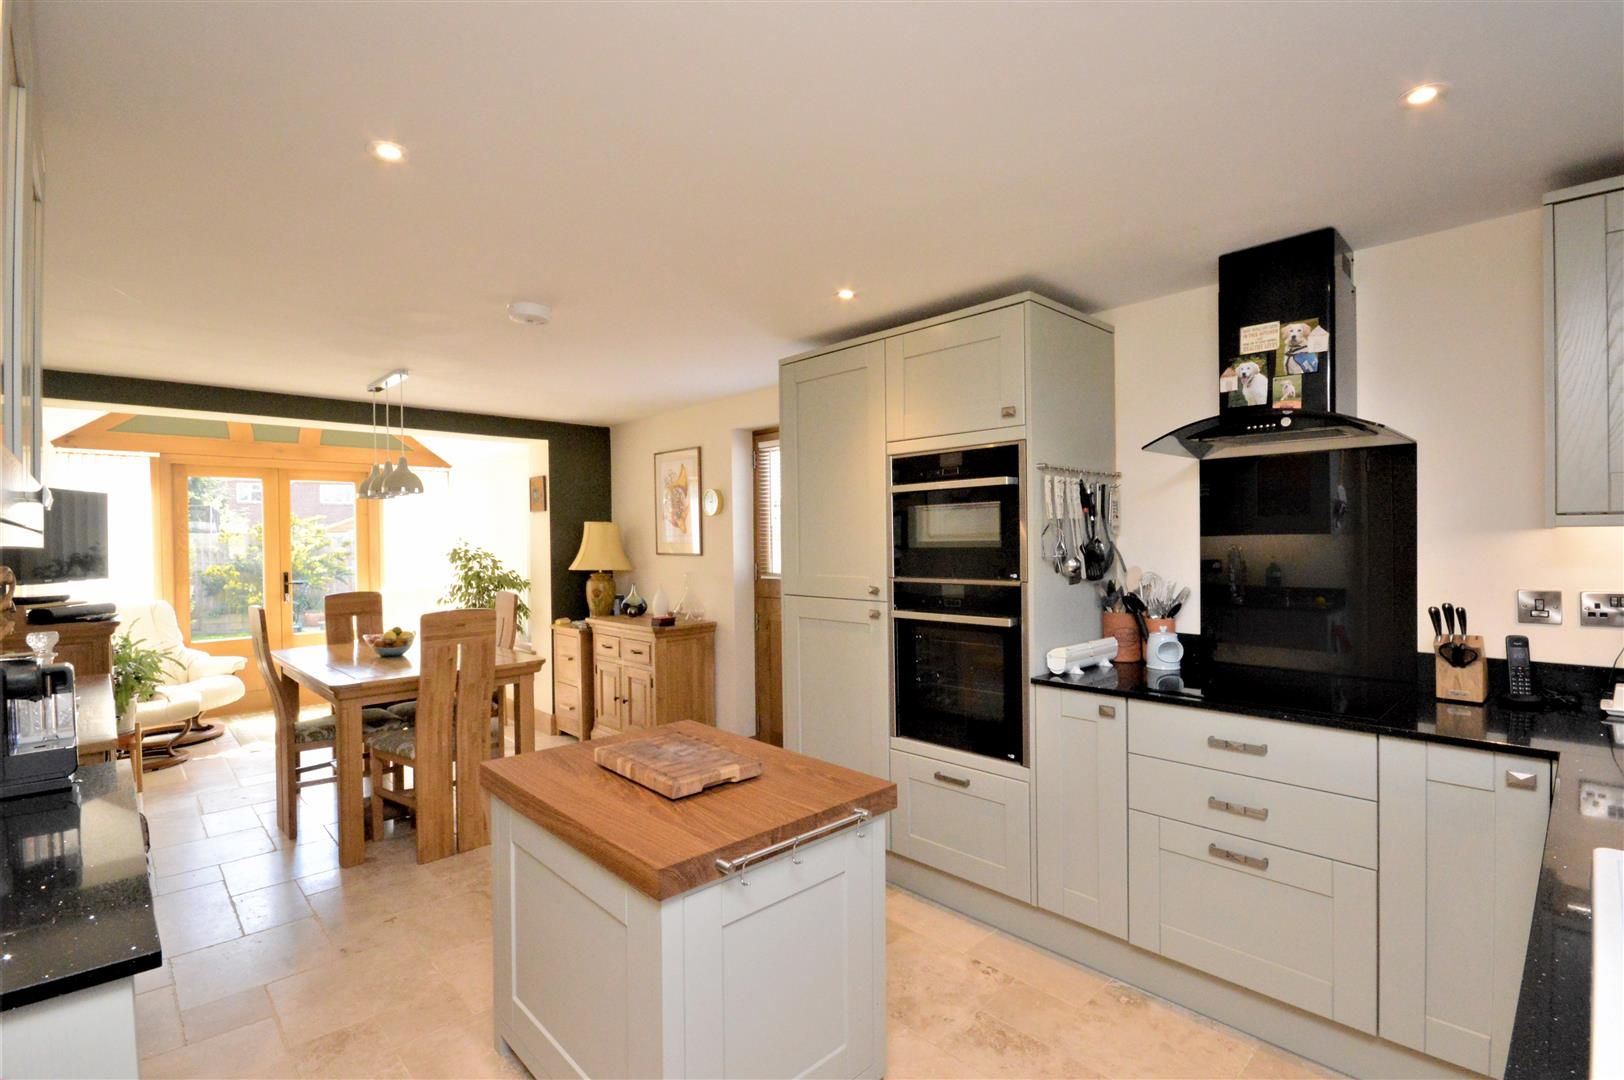 3 bed detached for sale in Winforton 4